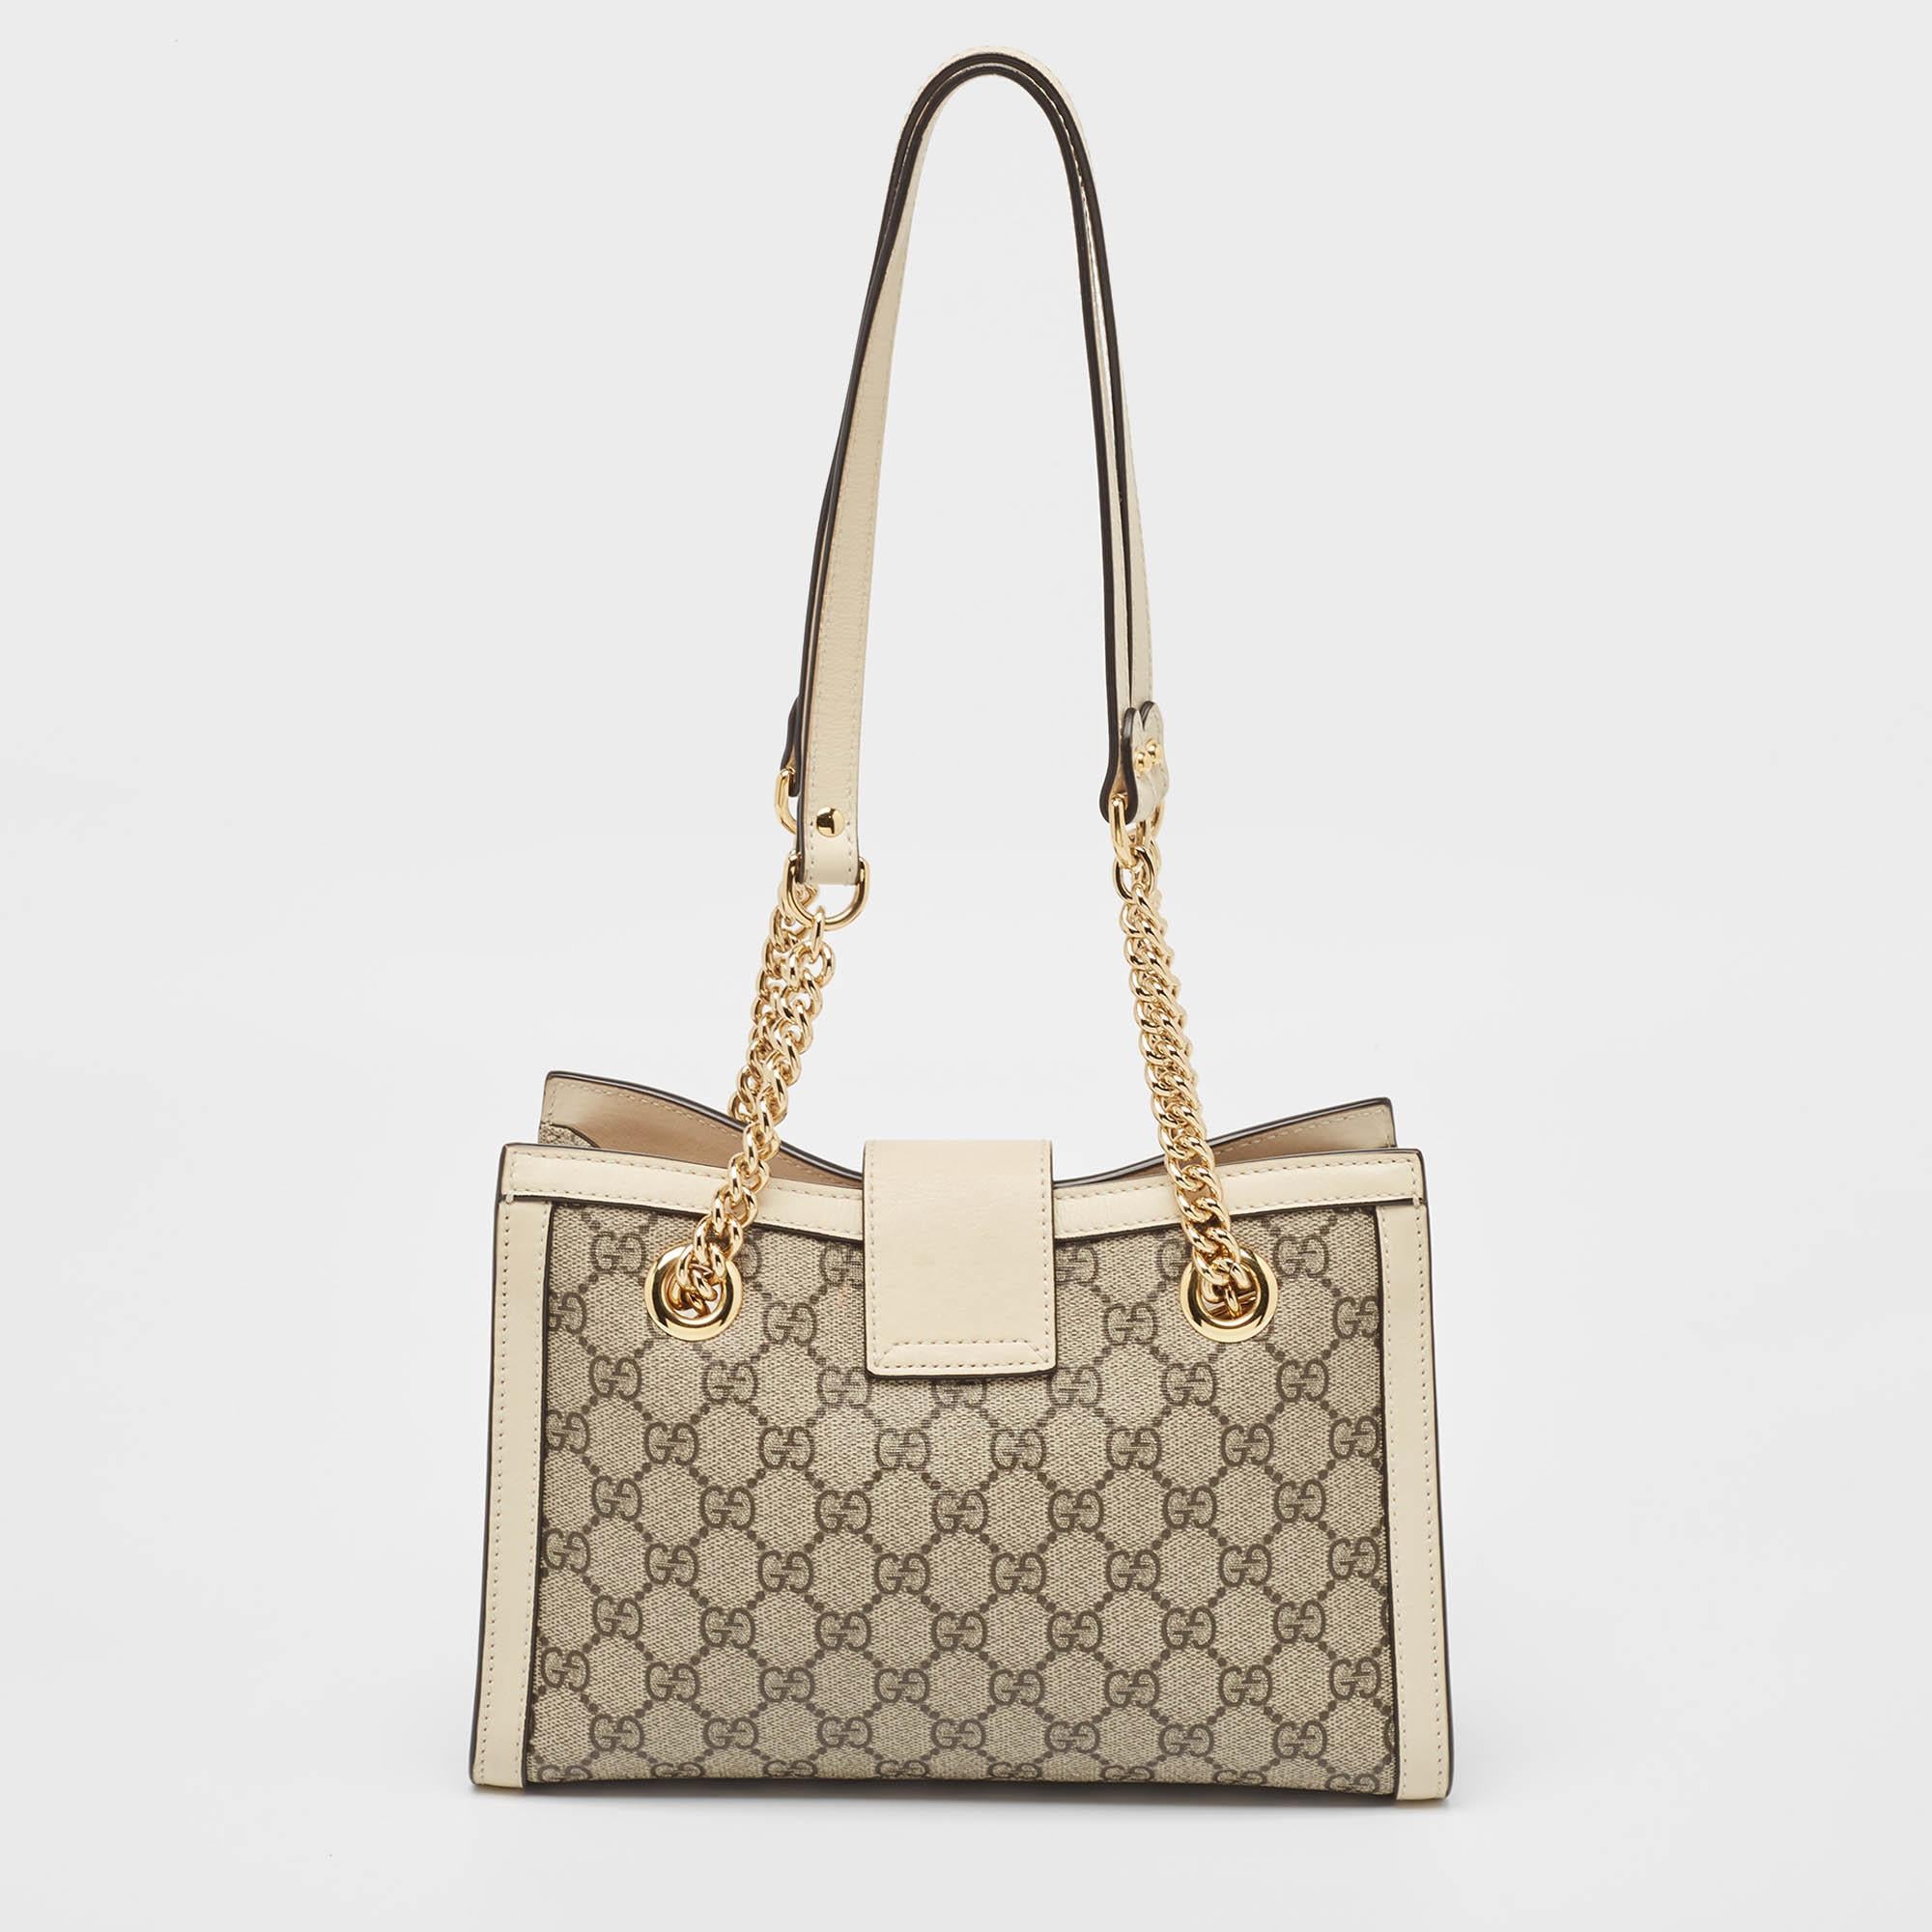 This Gucci shoulder bag for women is an example of the brand's fine designs that are skillfully crafted to project a classic charm. It is a functional creation with an elevating appeal.

